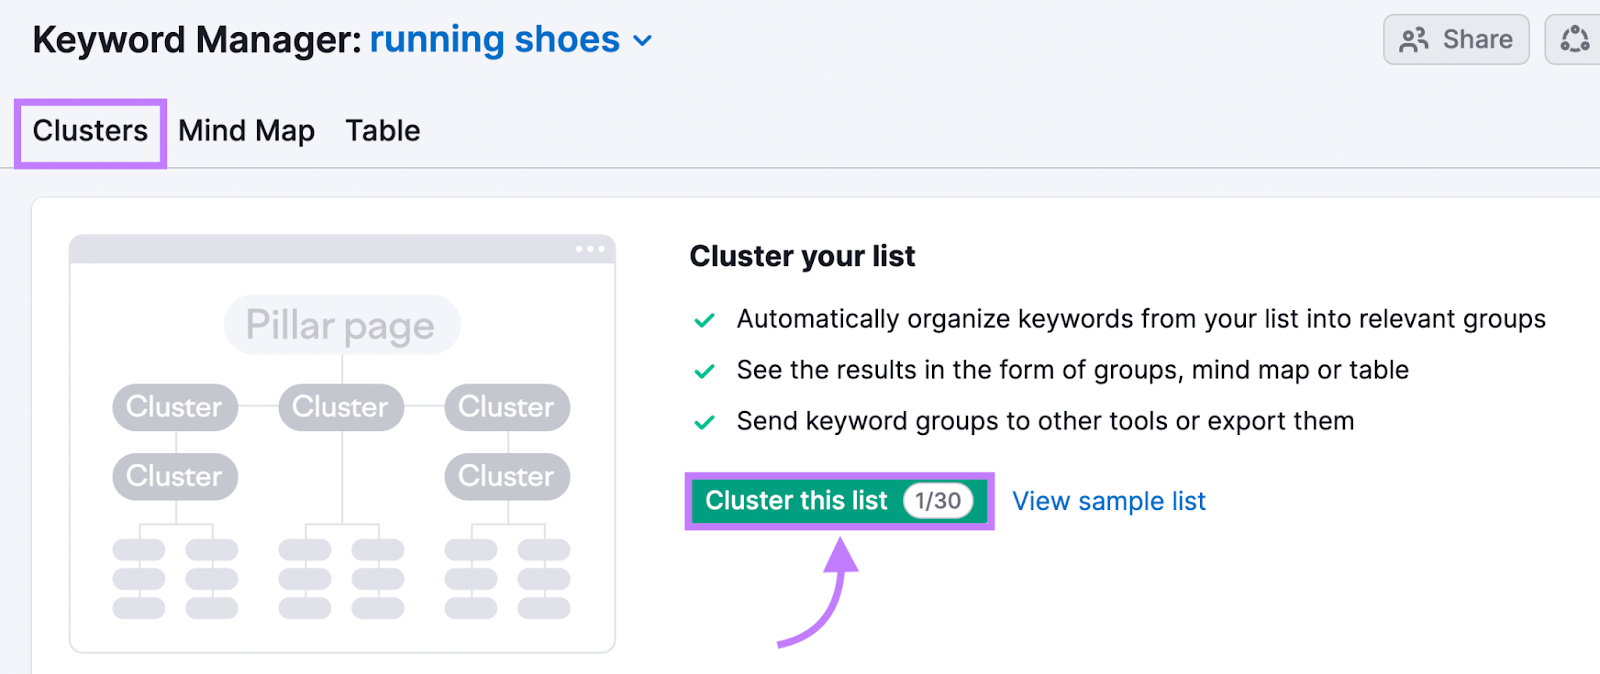 “Cluster this list" button selected under "Clusters" tab in Keyword Manager tool